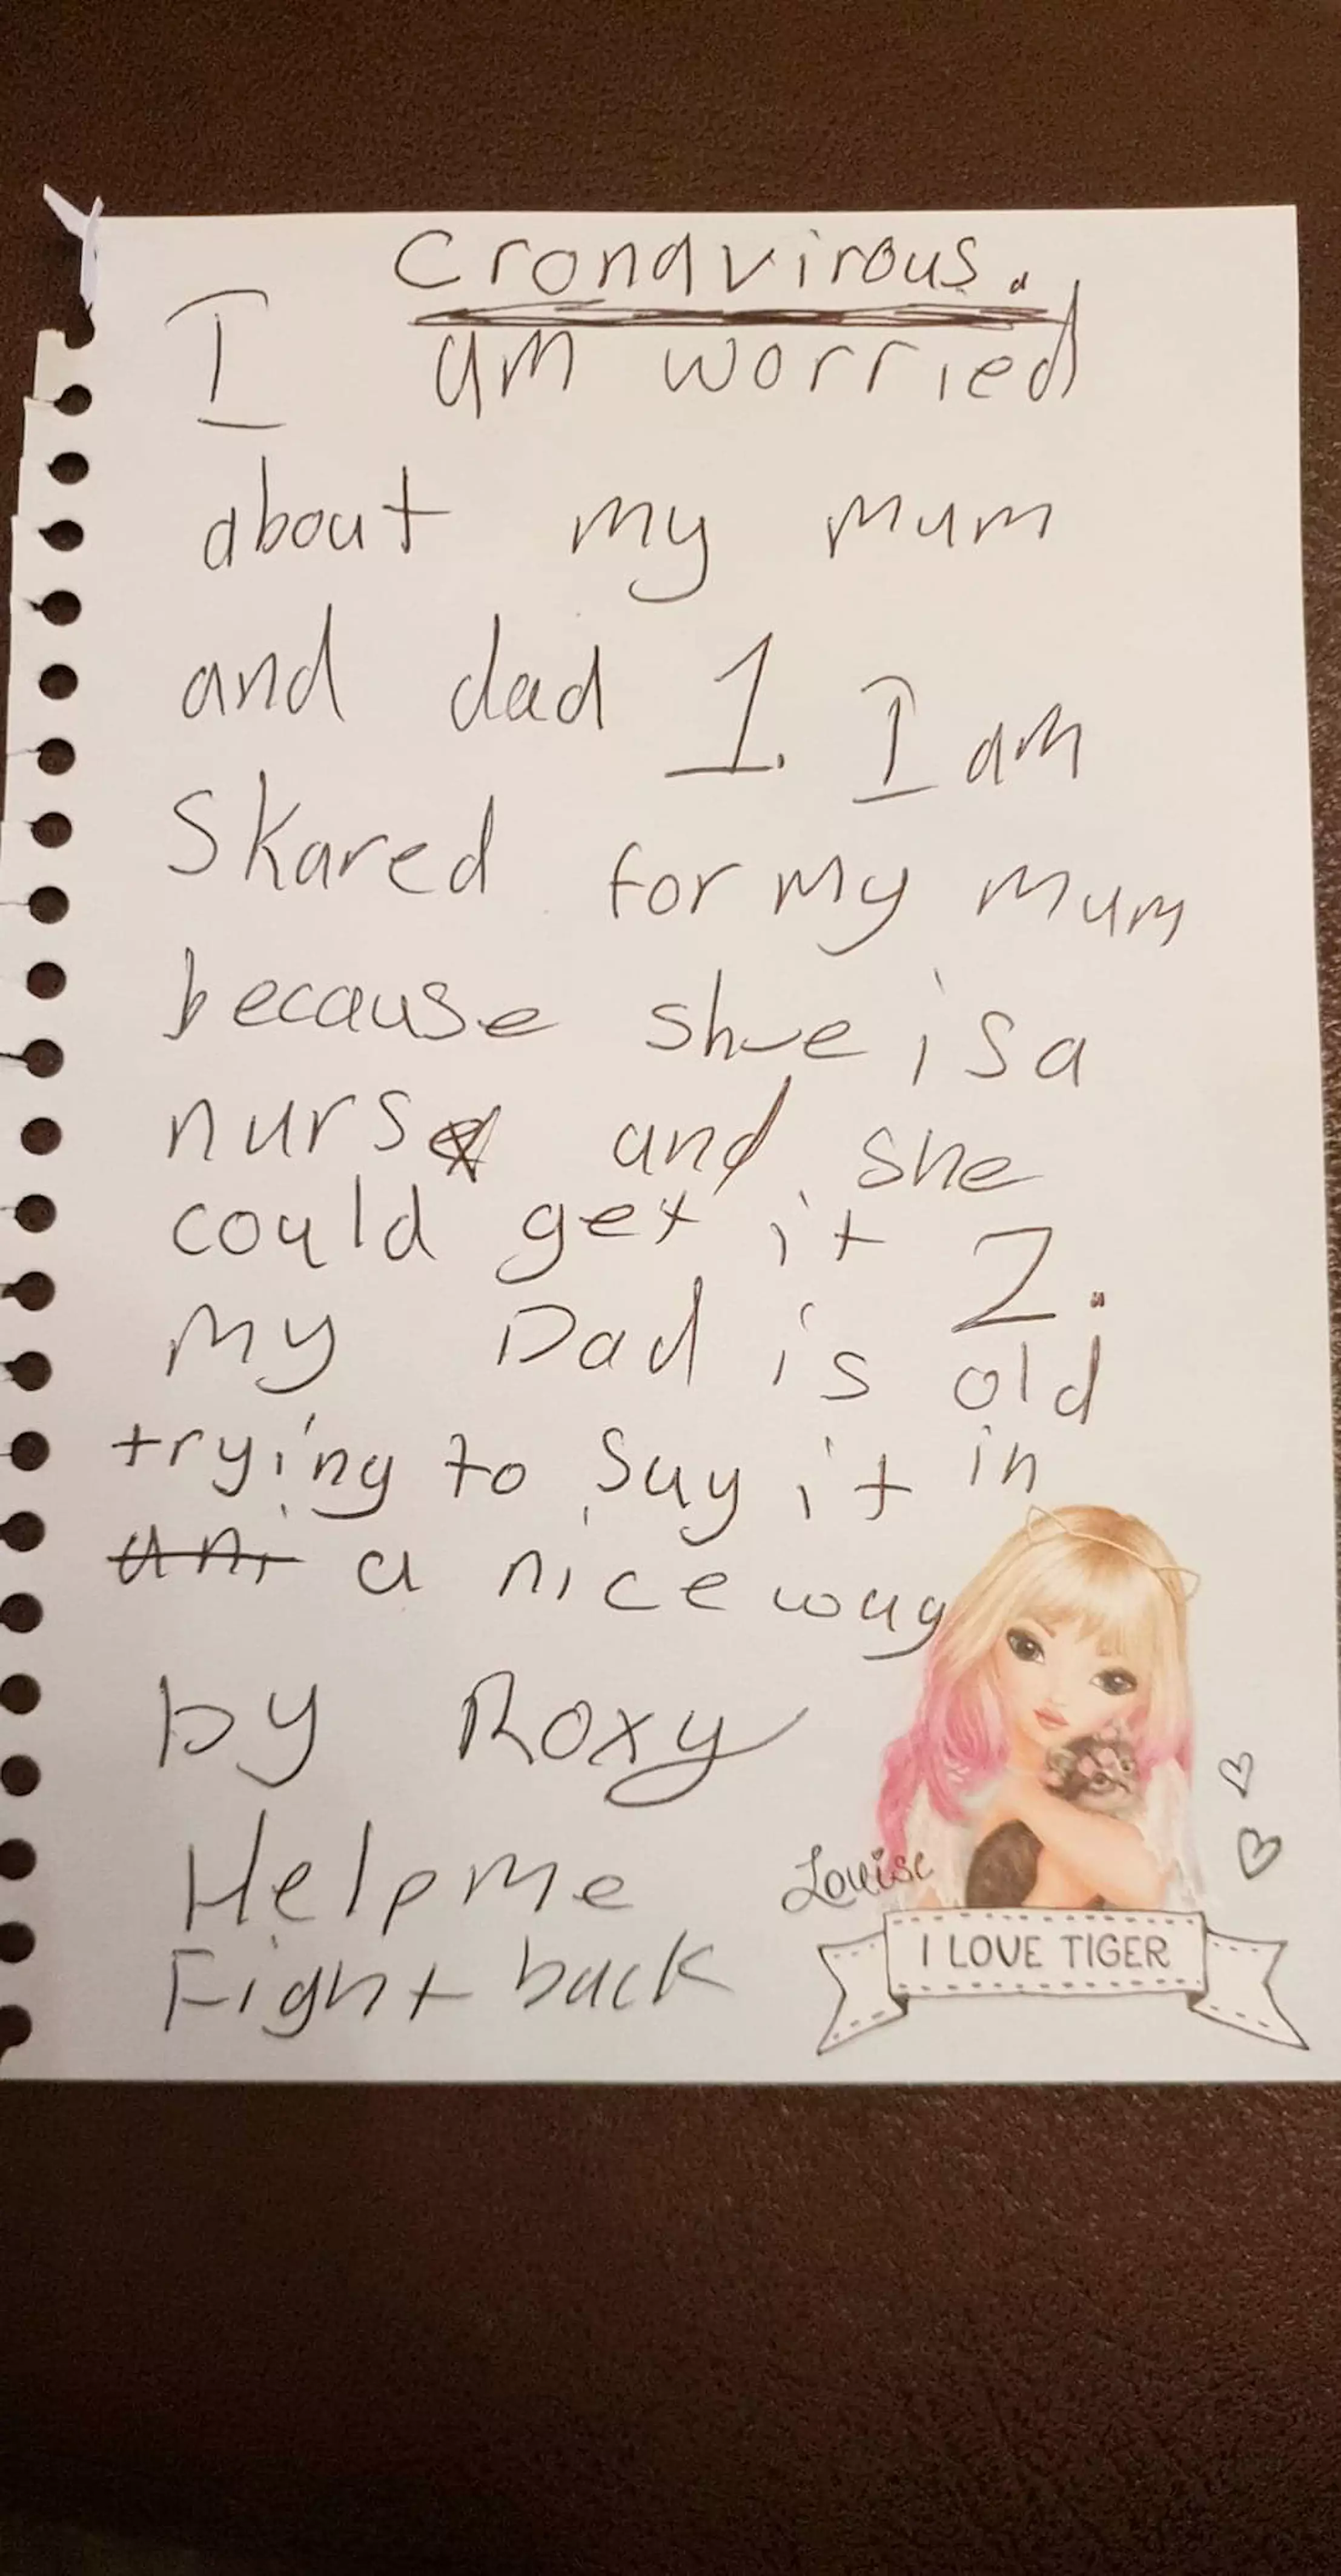 The letter expressed concerns for Roxy's mum and dad (